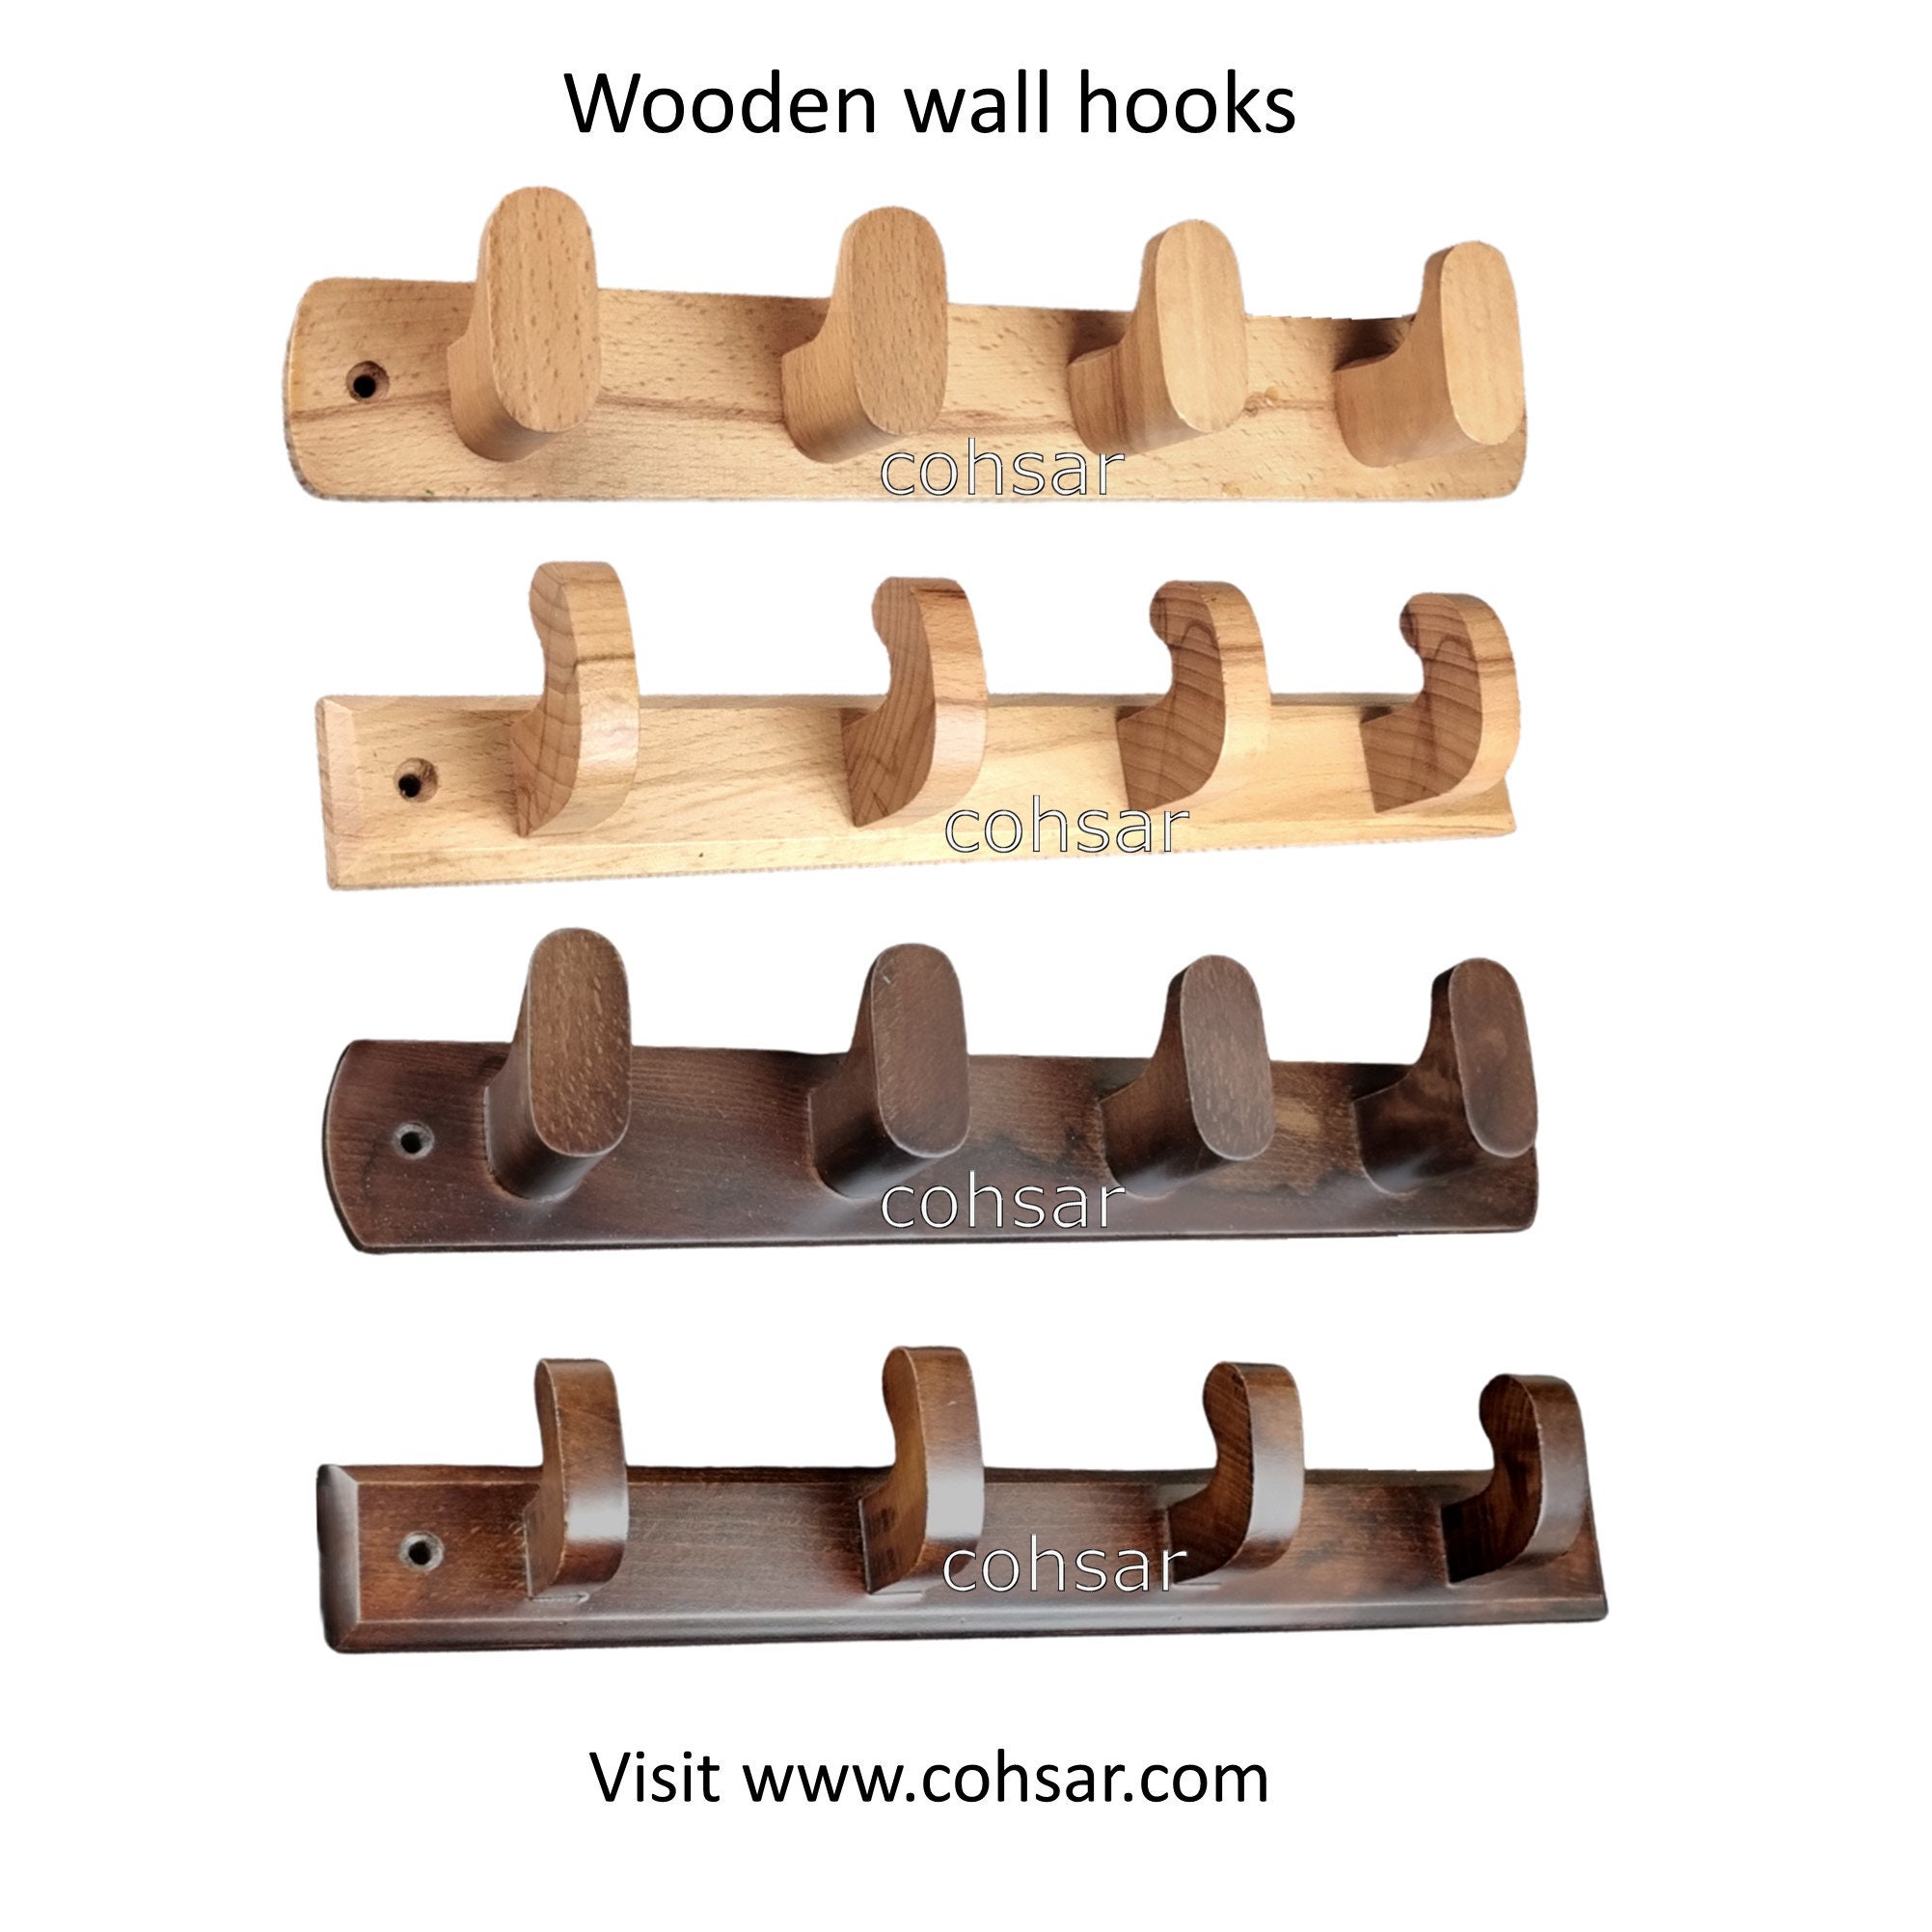 Natural Wooden Wall Hooks - Pack Of 4 - Wall Mounted Modern Wood Coat Rack  - Handmade Minimalist Home Decor Wooden Pegs For Hanging Hat, Towel, Or Pur